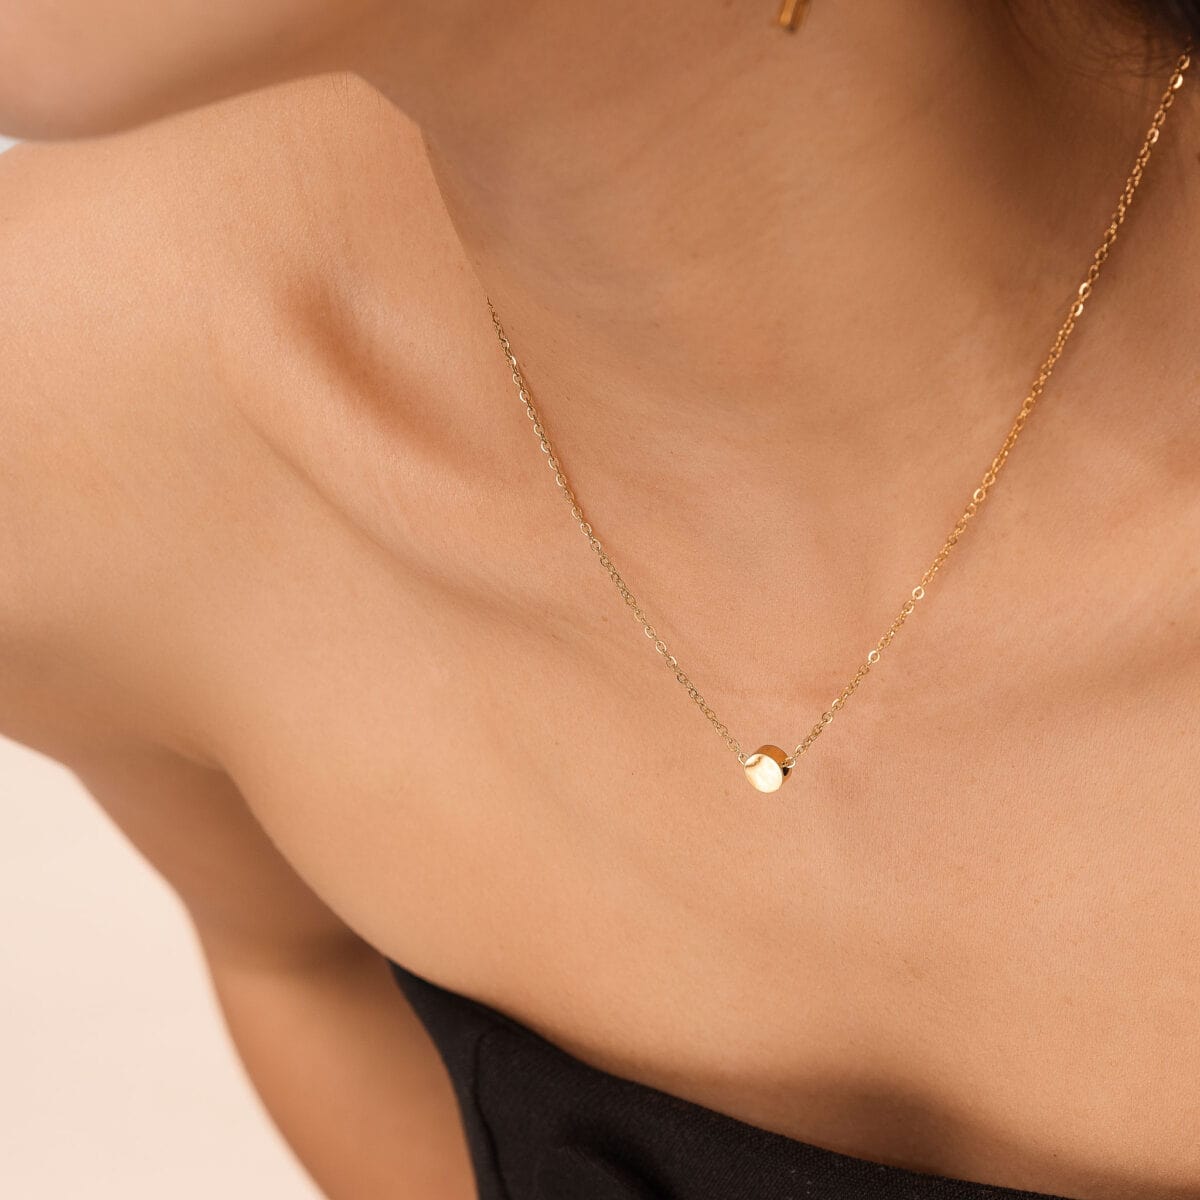 https://m.clubbella.co/product/dainty-sphere-necklace/ Dainty Sphere Necklace (6)